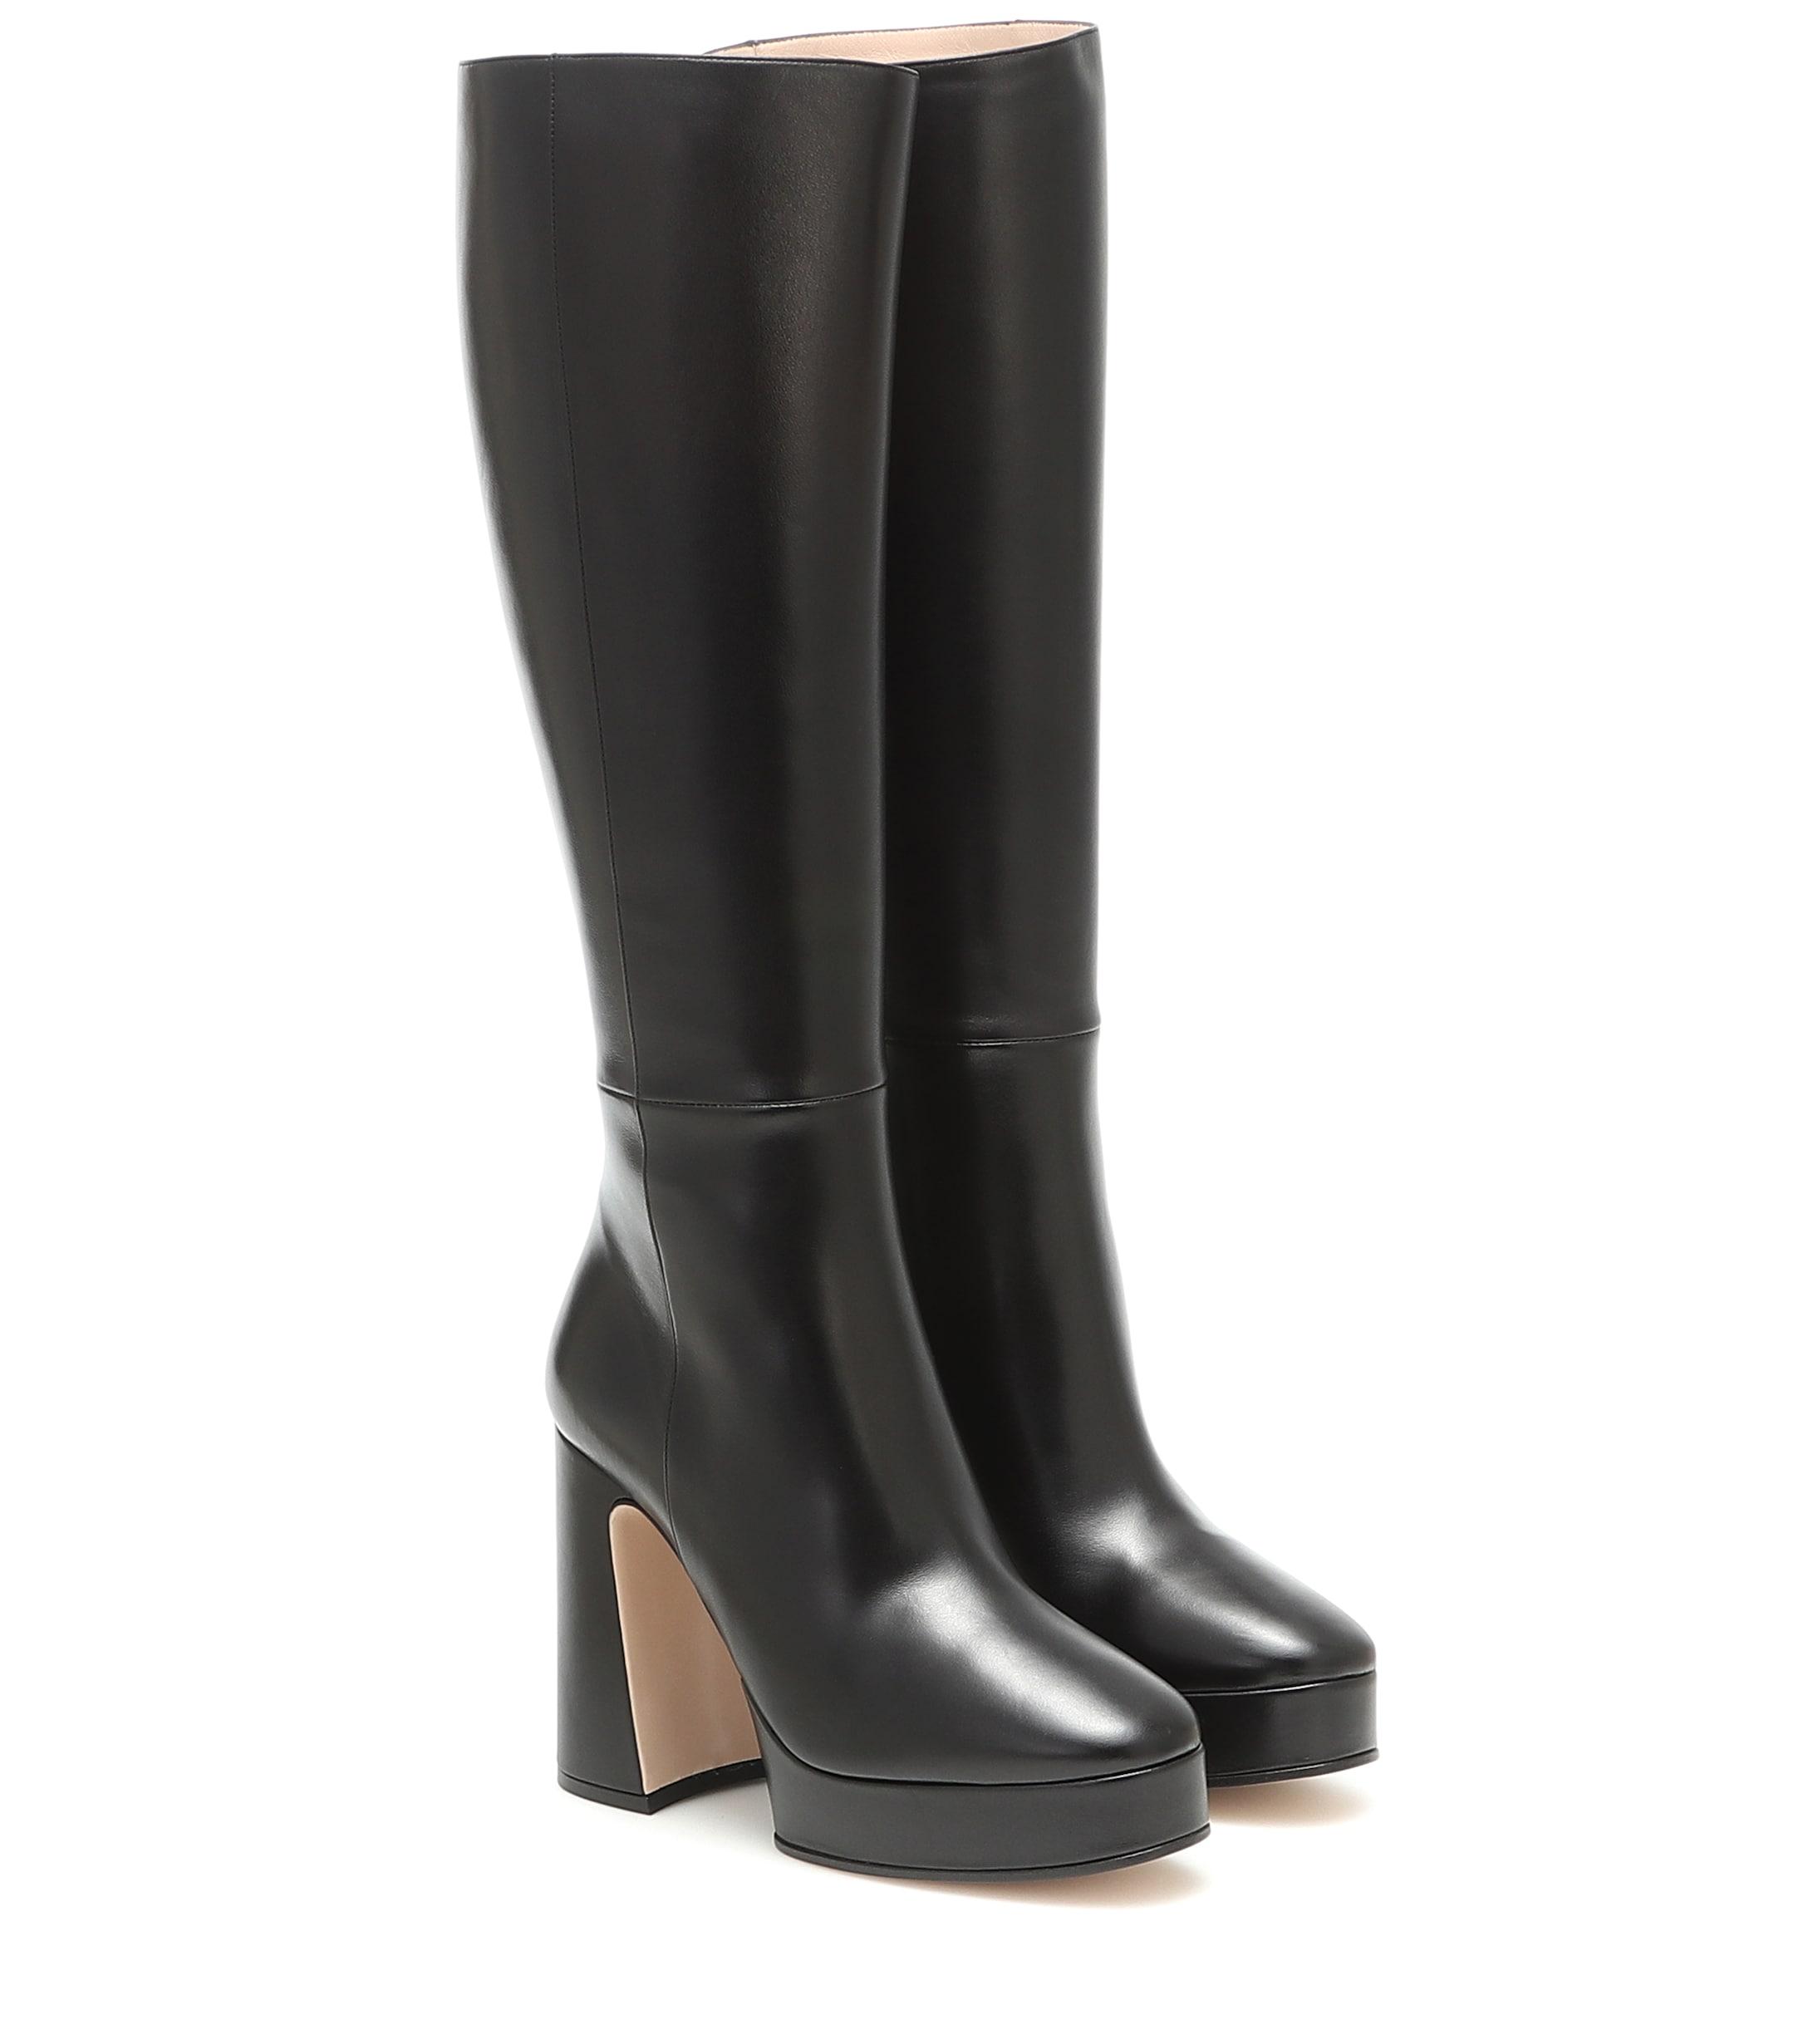 Gucci Madame Leather Knee-high Platform Boots in Black (Green) - Lyst